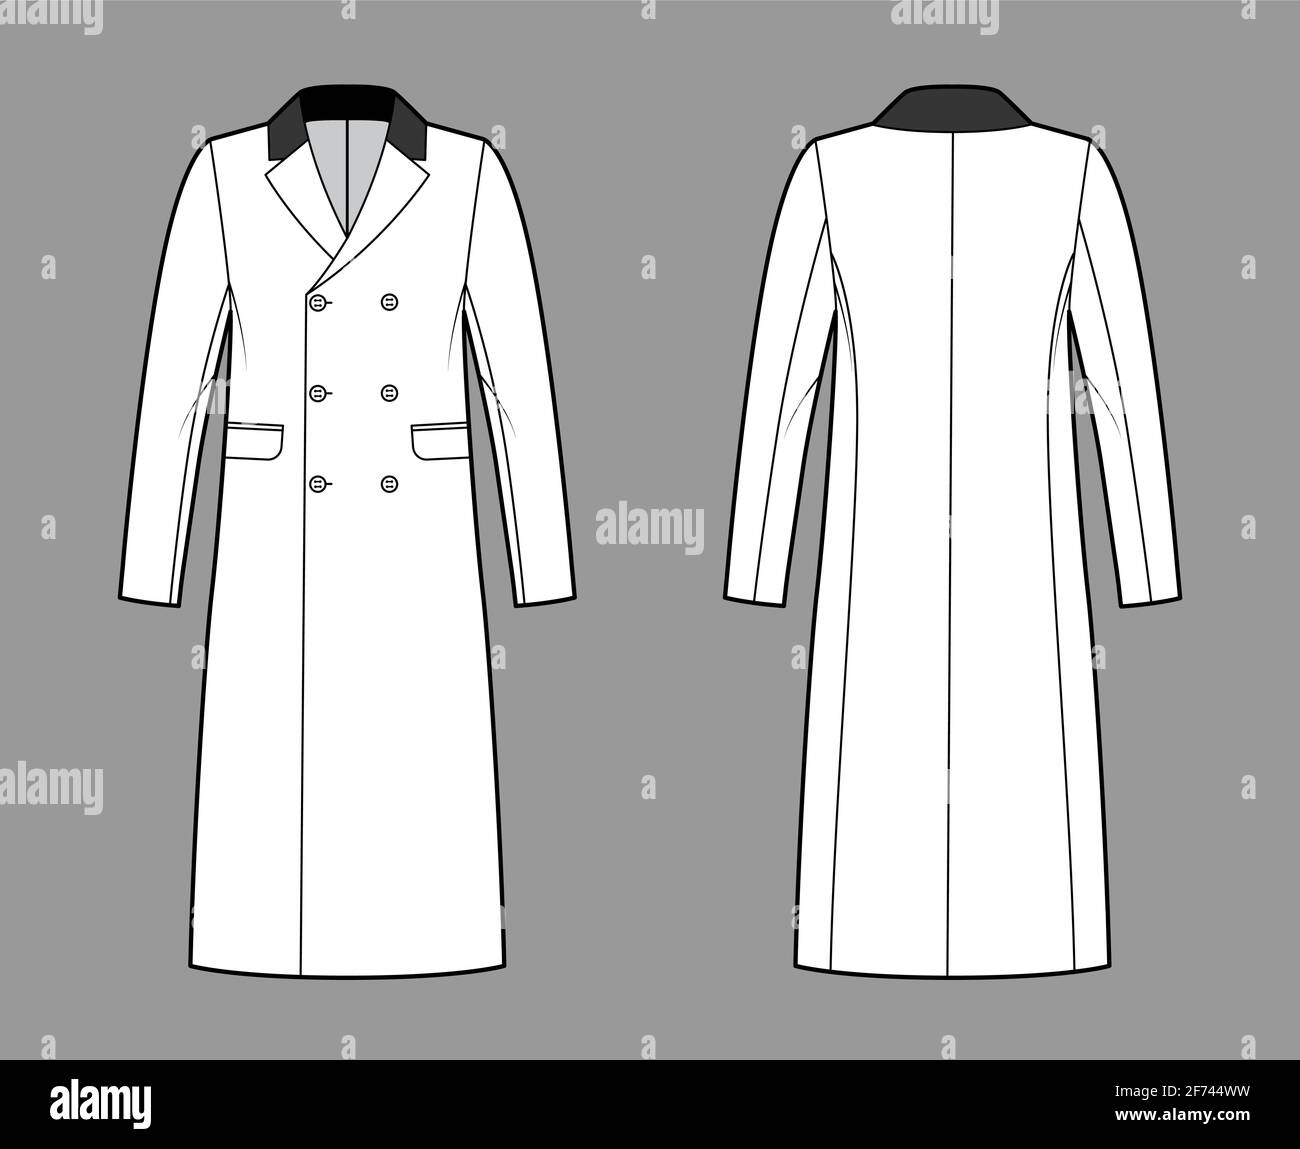 Chesterfield overcoat Stock Vector Images - Alamy